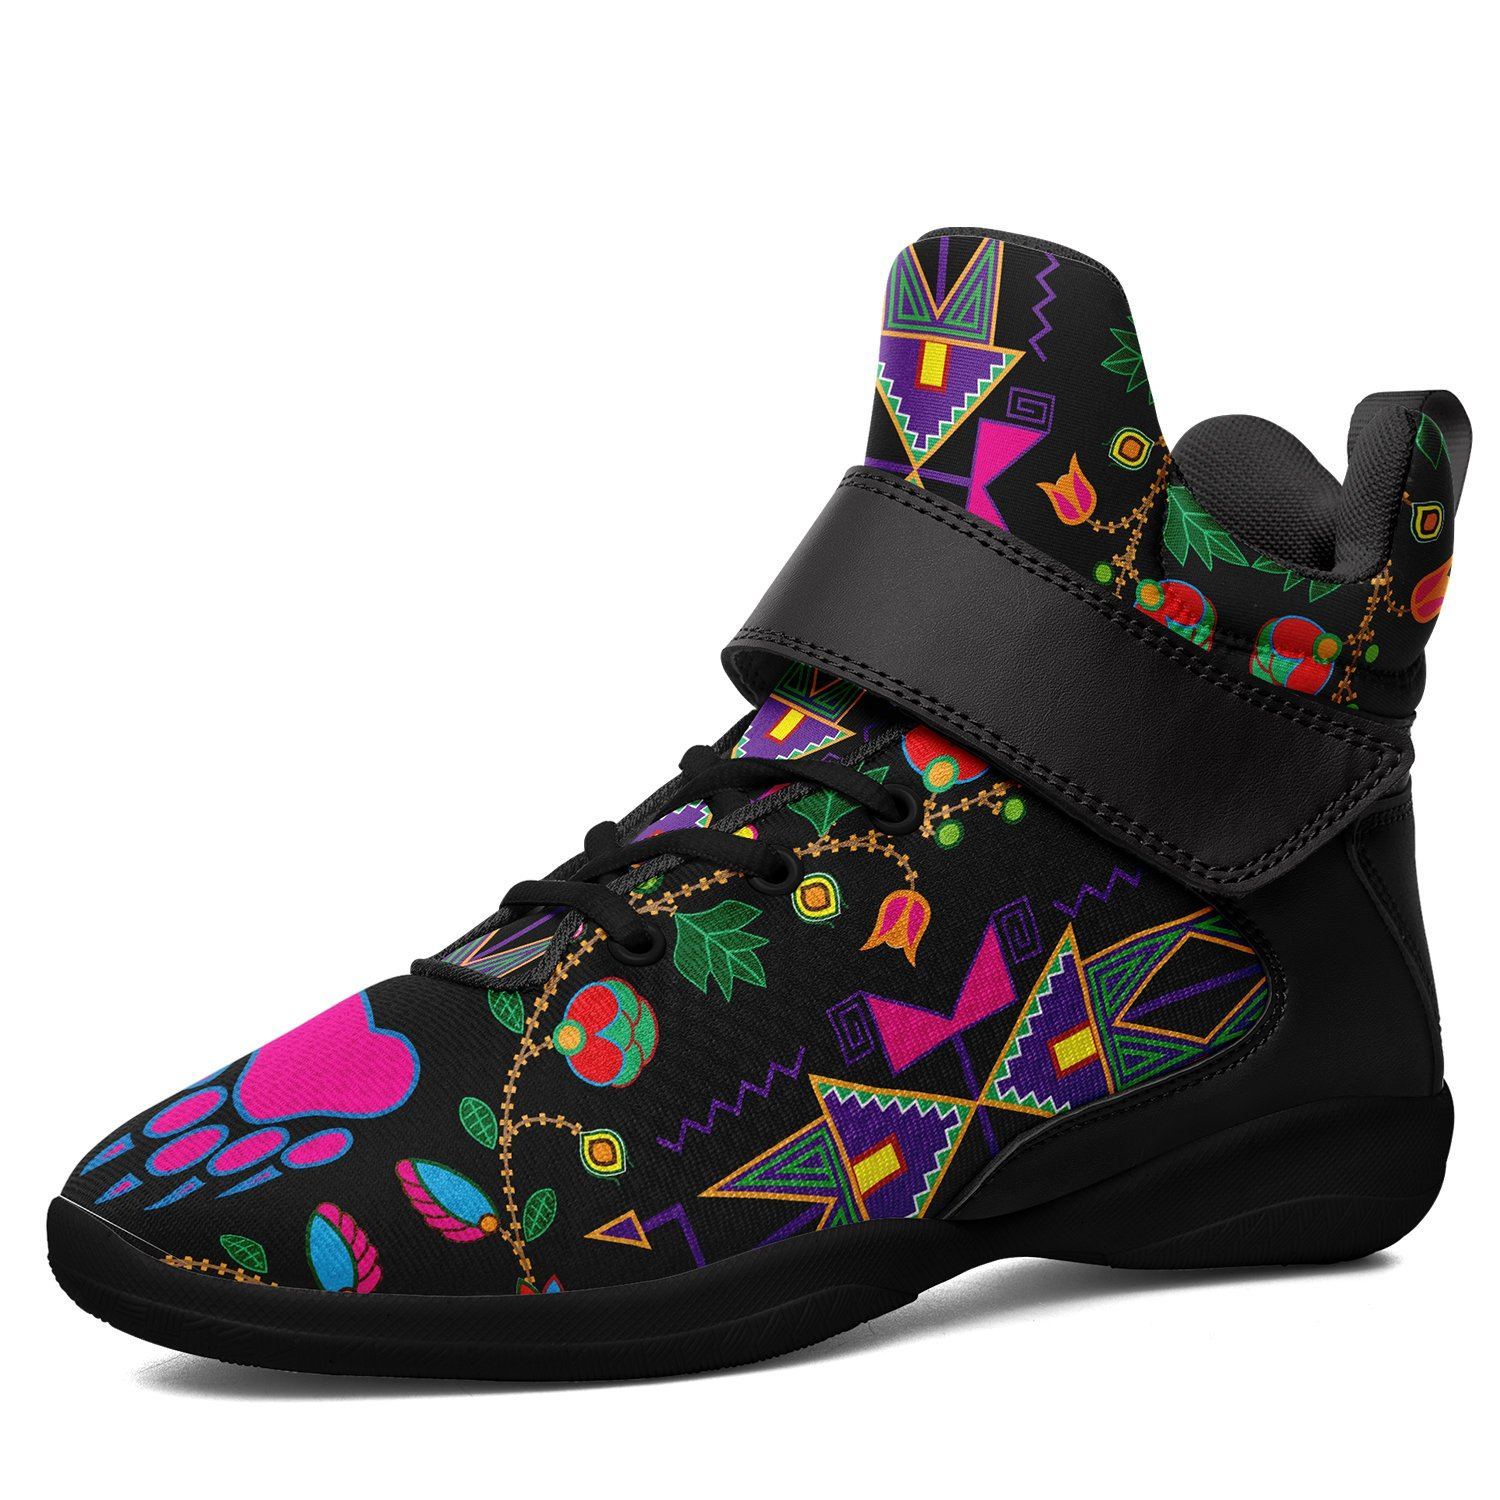 Geometric Floral Fall Black Kid's Ipottaa Basketball / Sport High Top Shoes 49 Dzine US Women 4.5 / US Youth 3.5 / EUR 35 Black Sole with Black Strap 